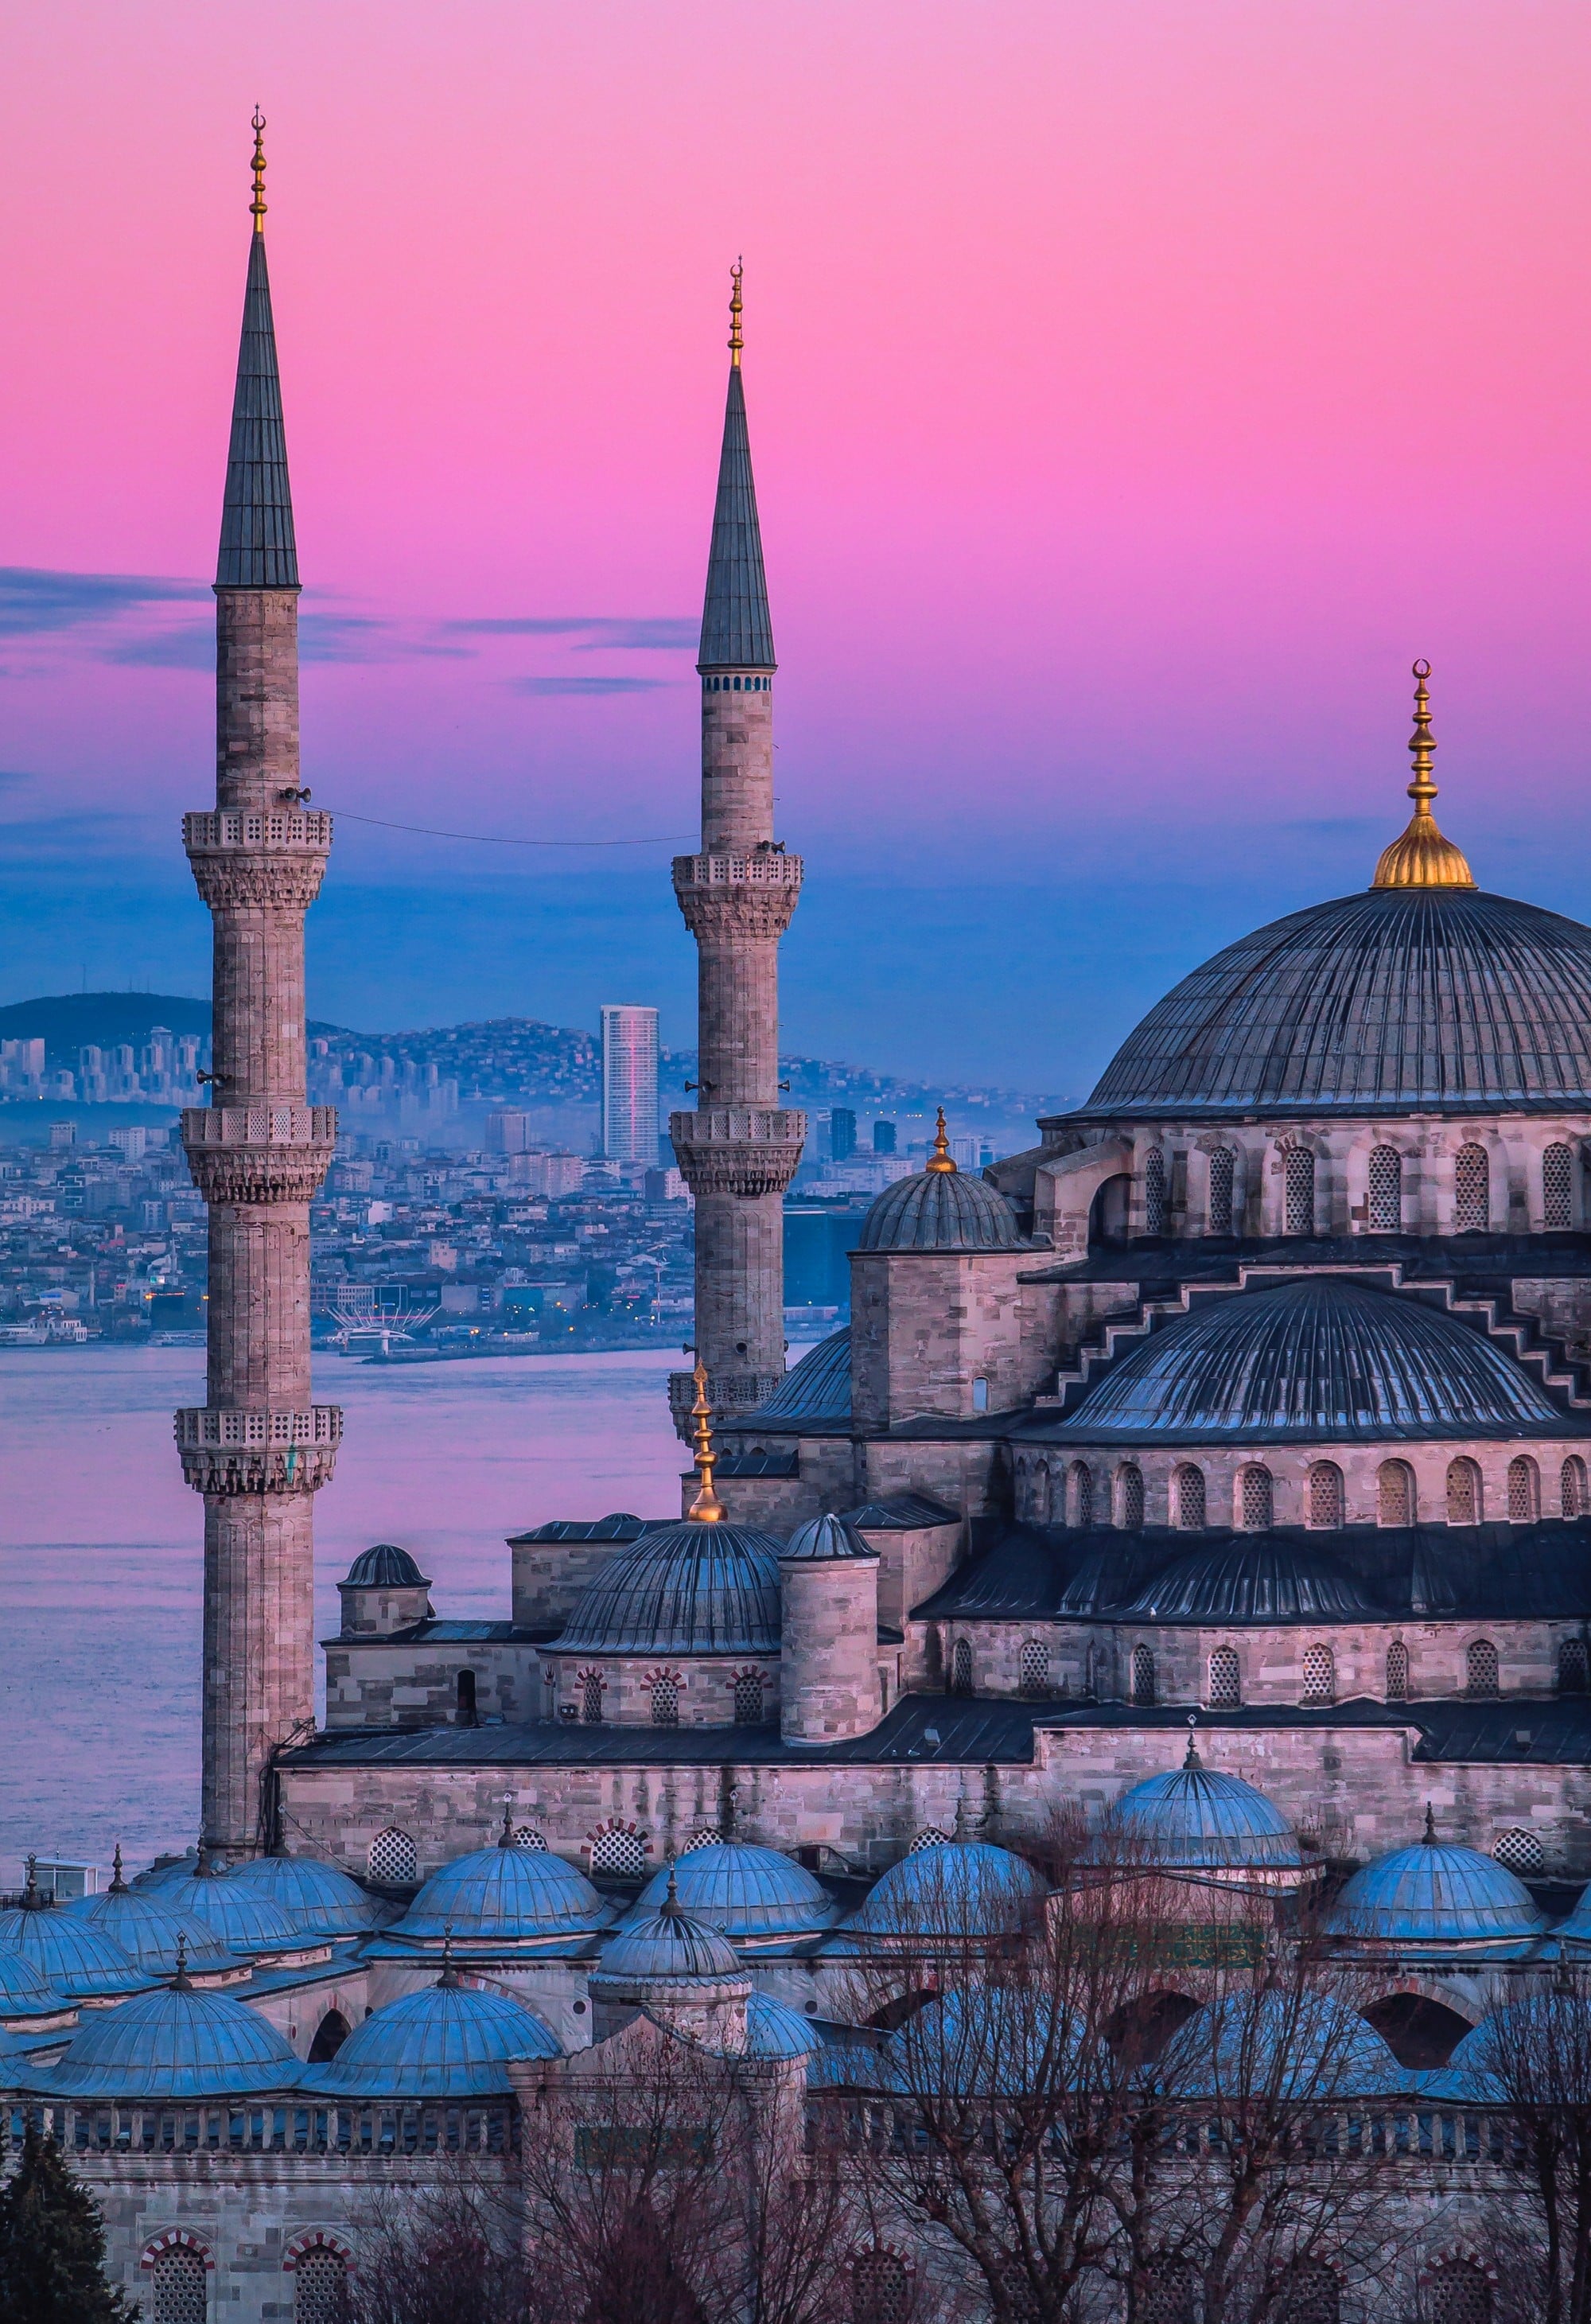 The only city in the world that can lay claim to straddling two continents, Istanbul—once known as Constantinople, capital of the Byzantine & Ottoman empires